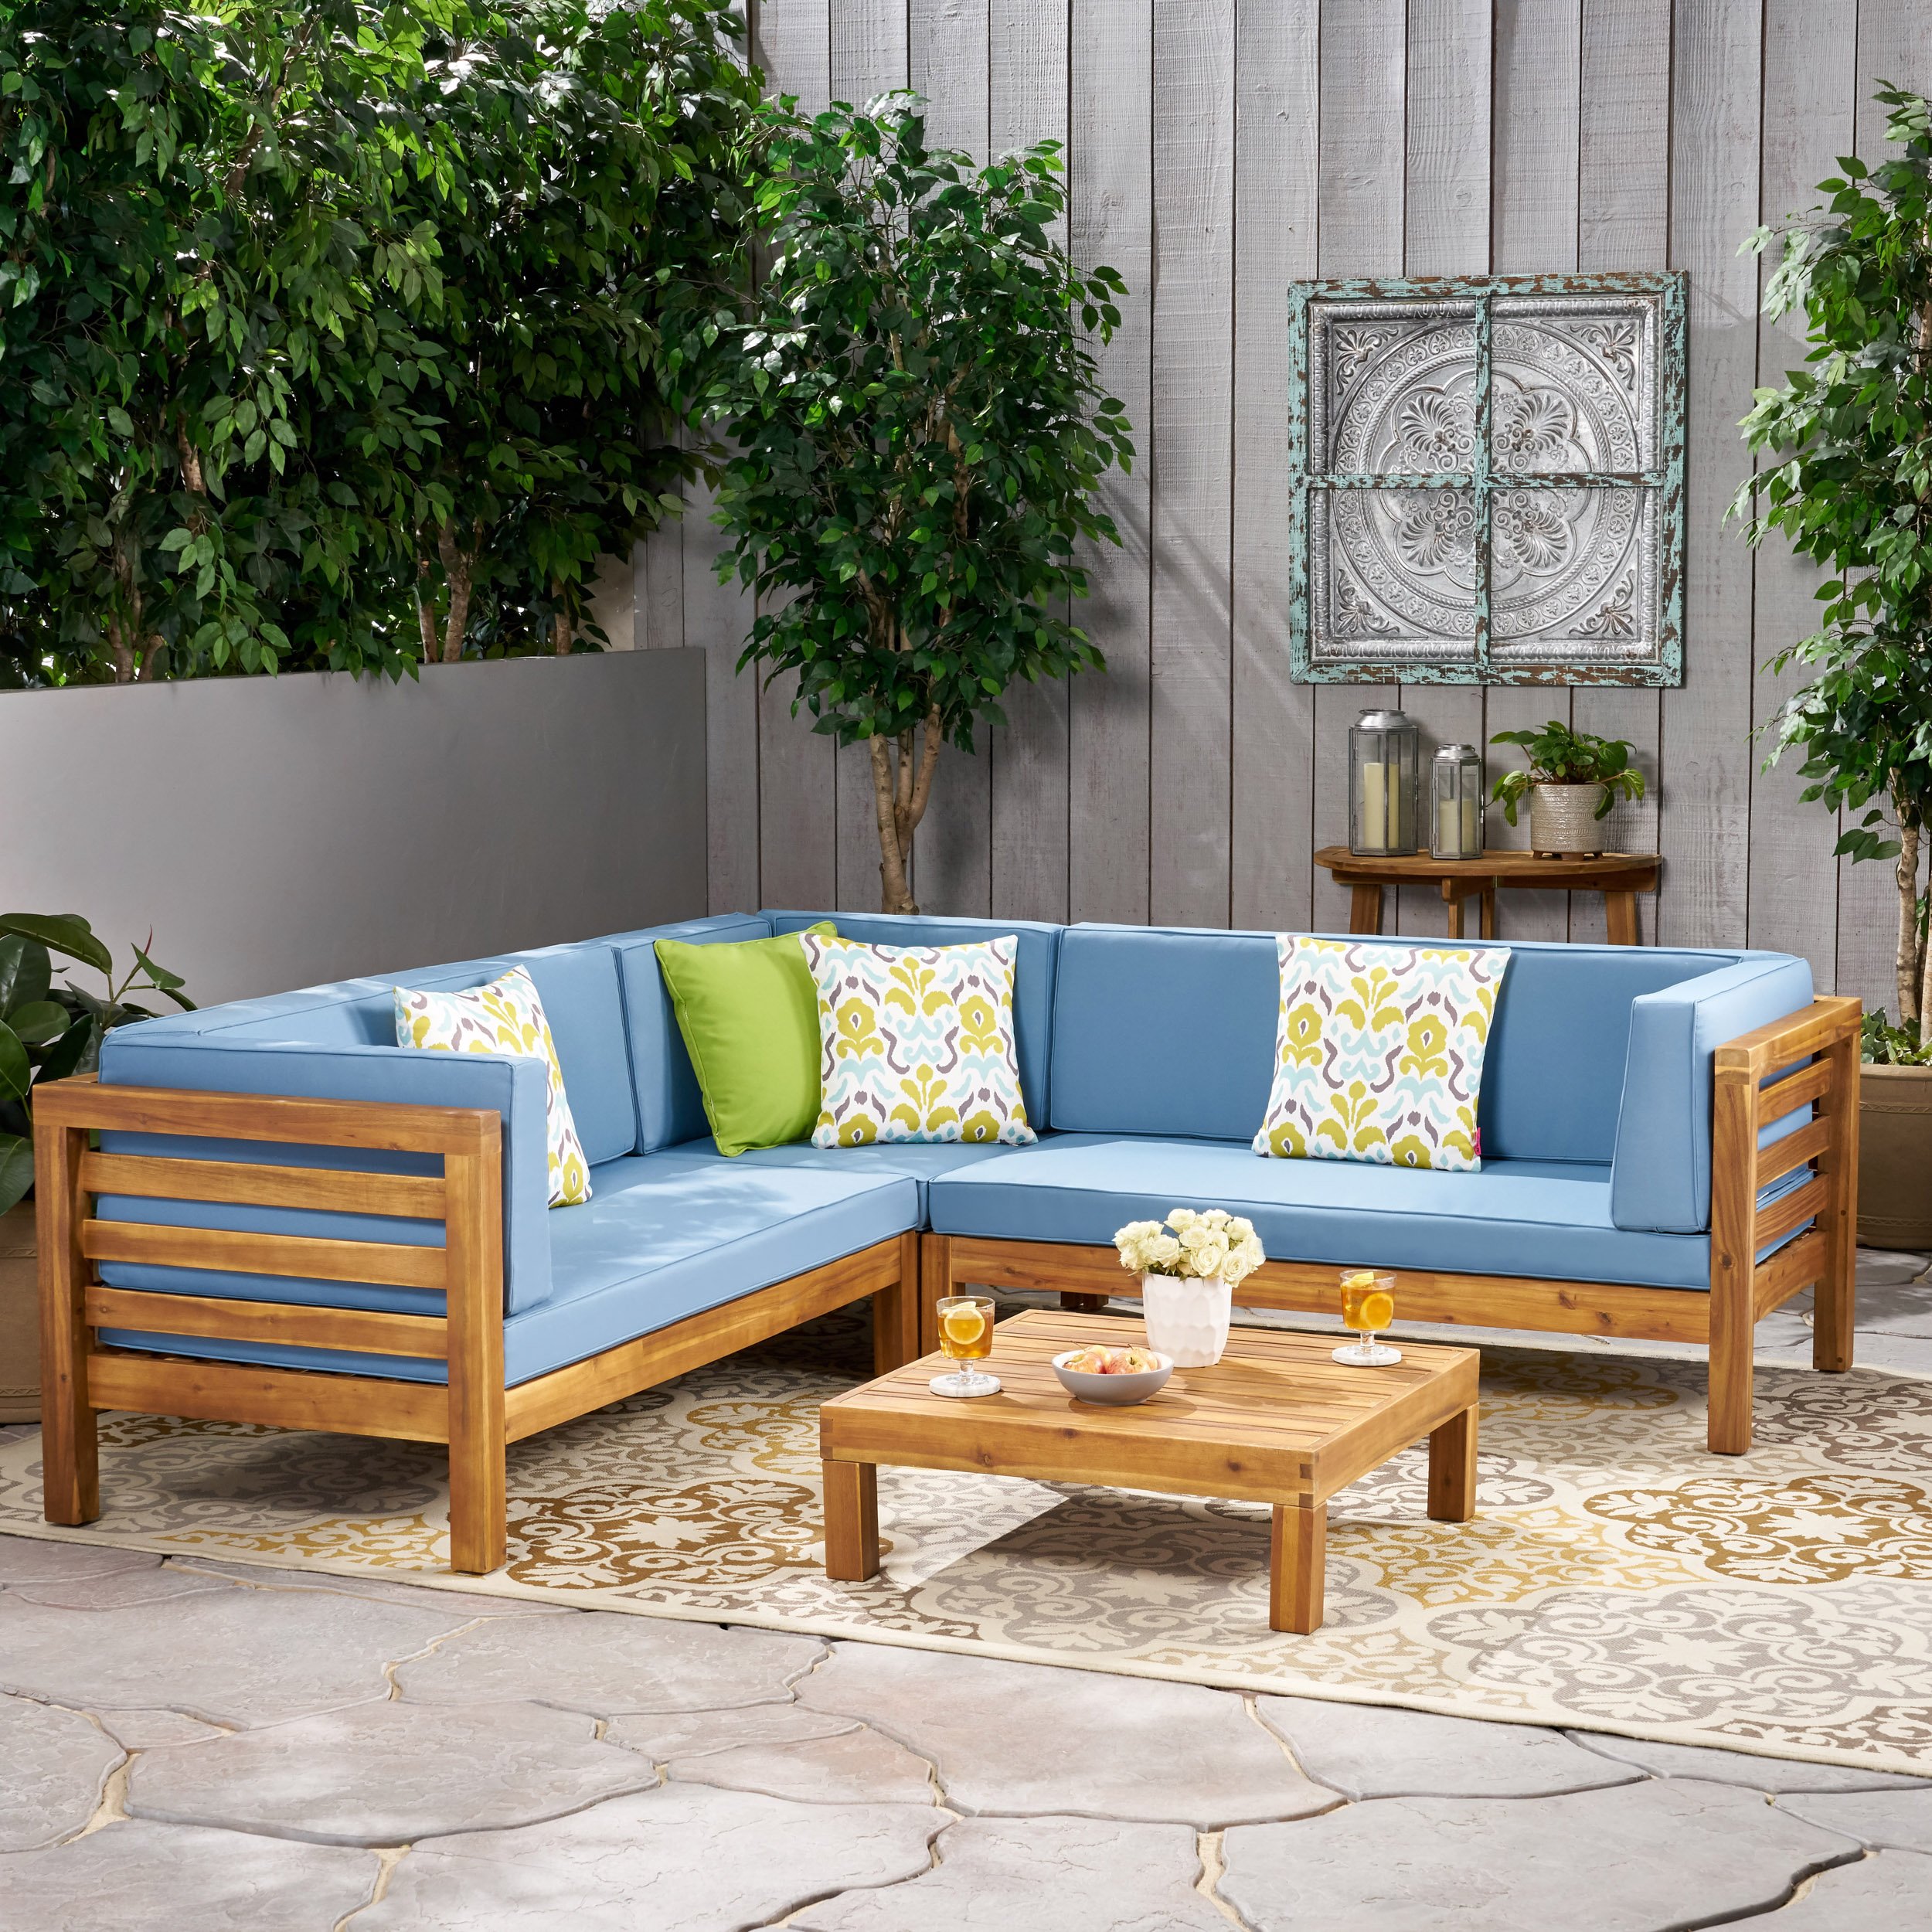 Ravello 4 Piece Outdoor Wooden Sectional Set With Dark Grey Cushions - Blue, Natural